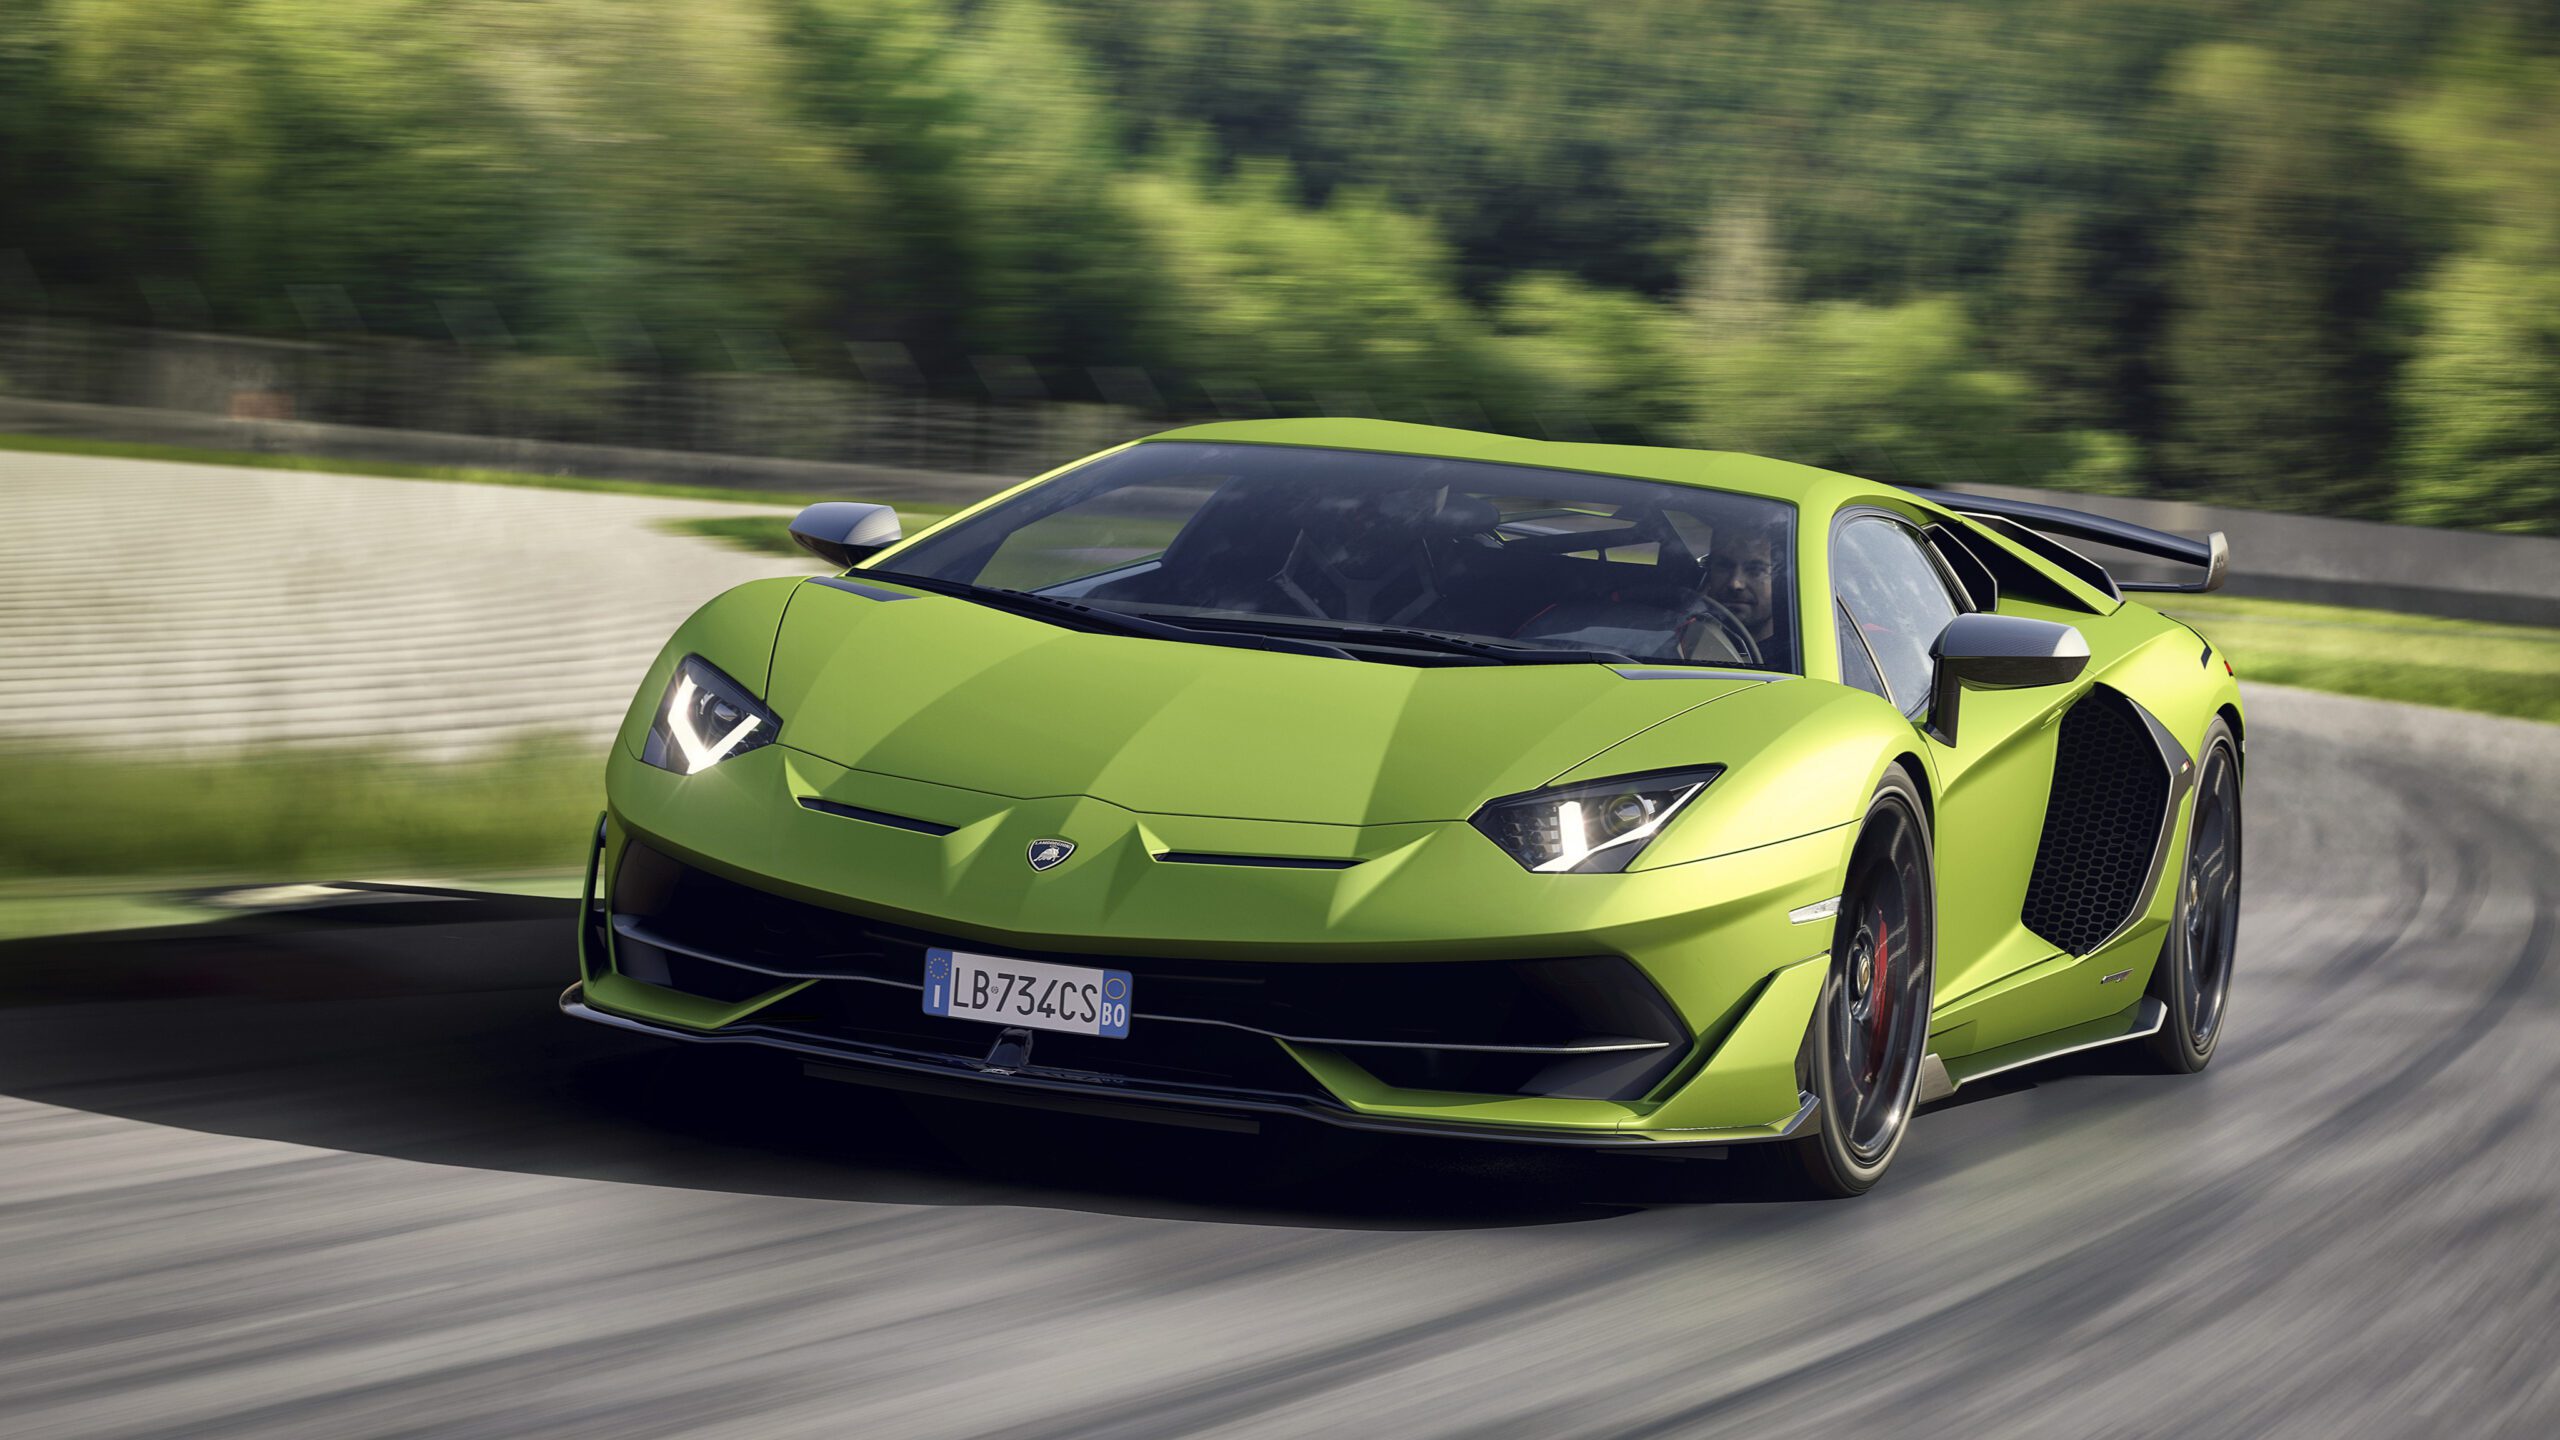 Lamborghini: 0-60 time, 1/4 Mile time, Power & Top Speed (Every Model)